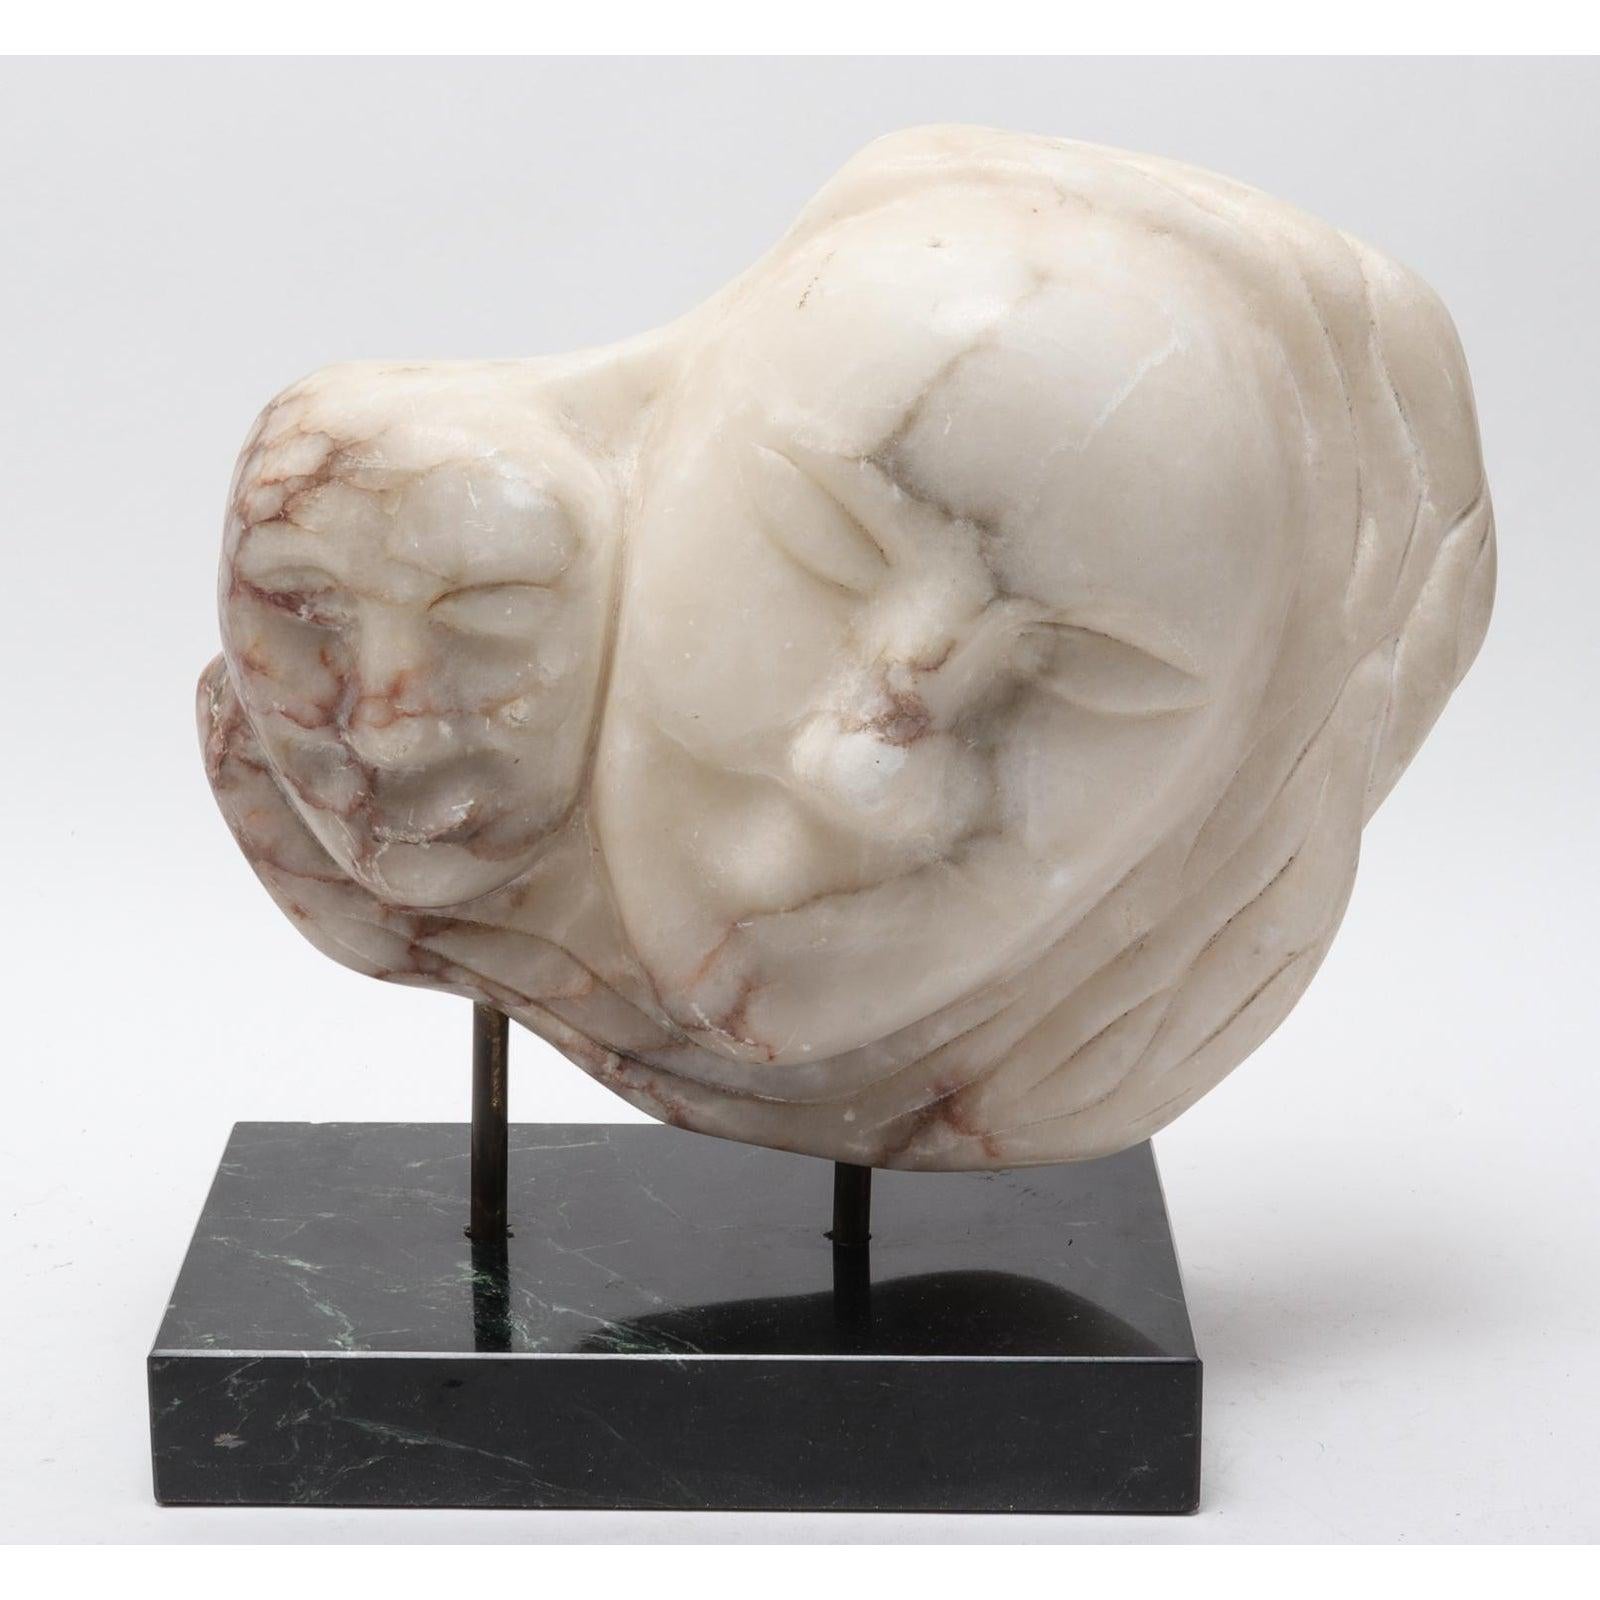 Modern white marble sculpture depicting the heads of a mother and child, made during the 20th century. The piece is mounted onto a rectangular black marble base. Sculpture: 11